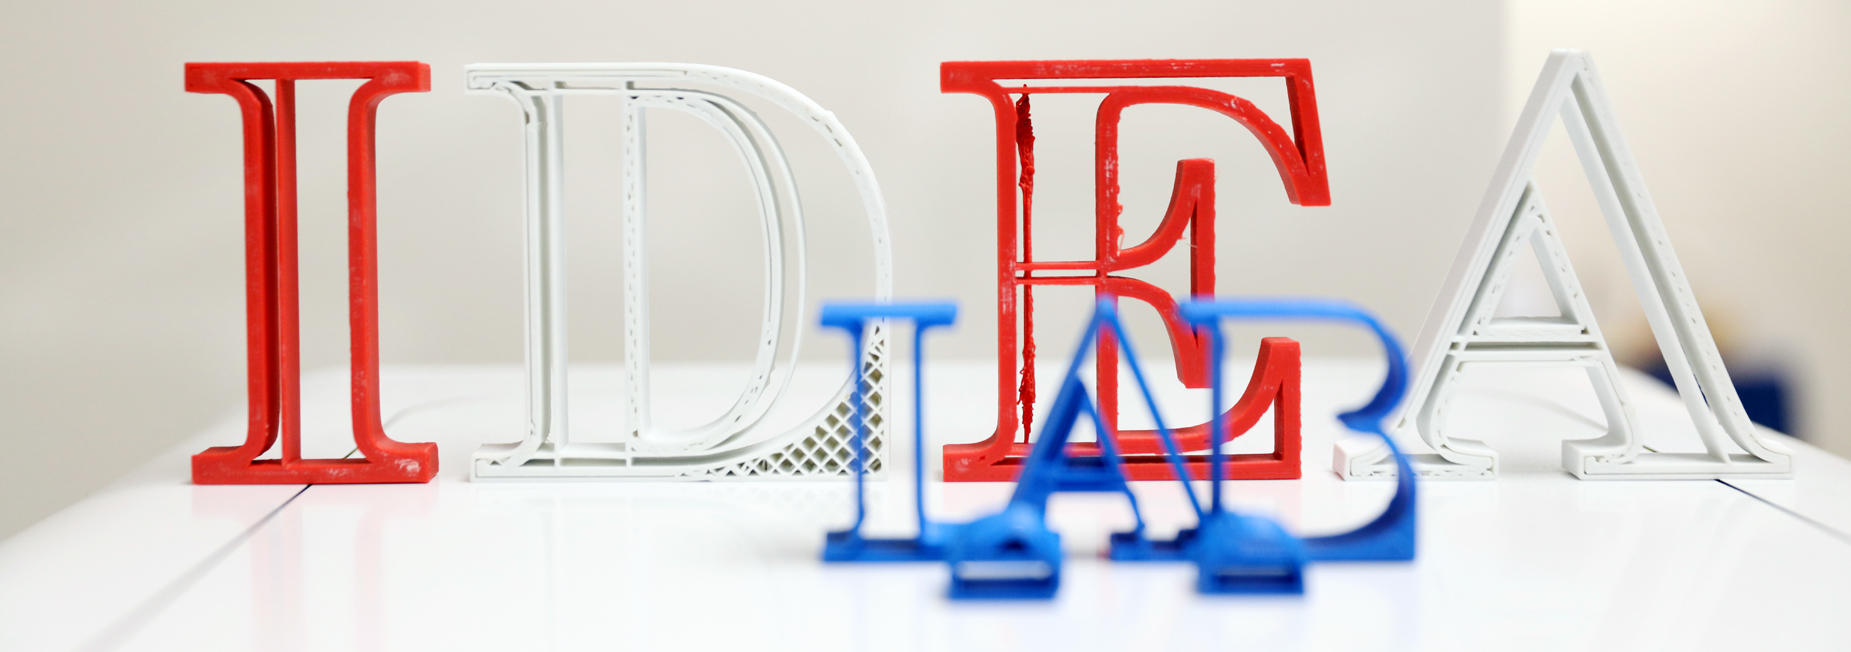 Acrylic letters spell out idea lab